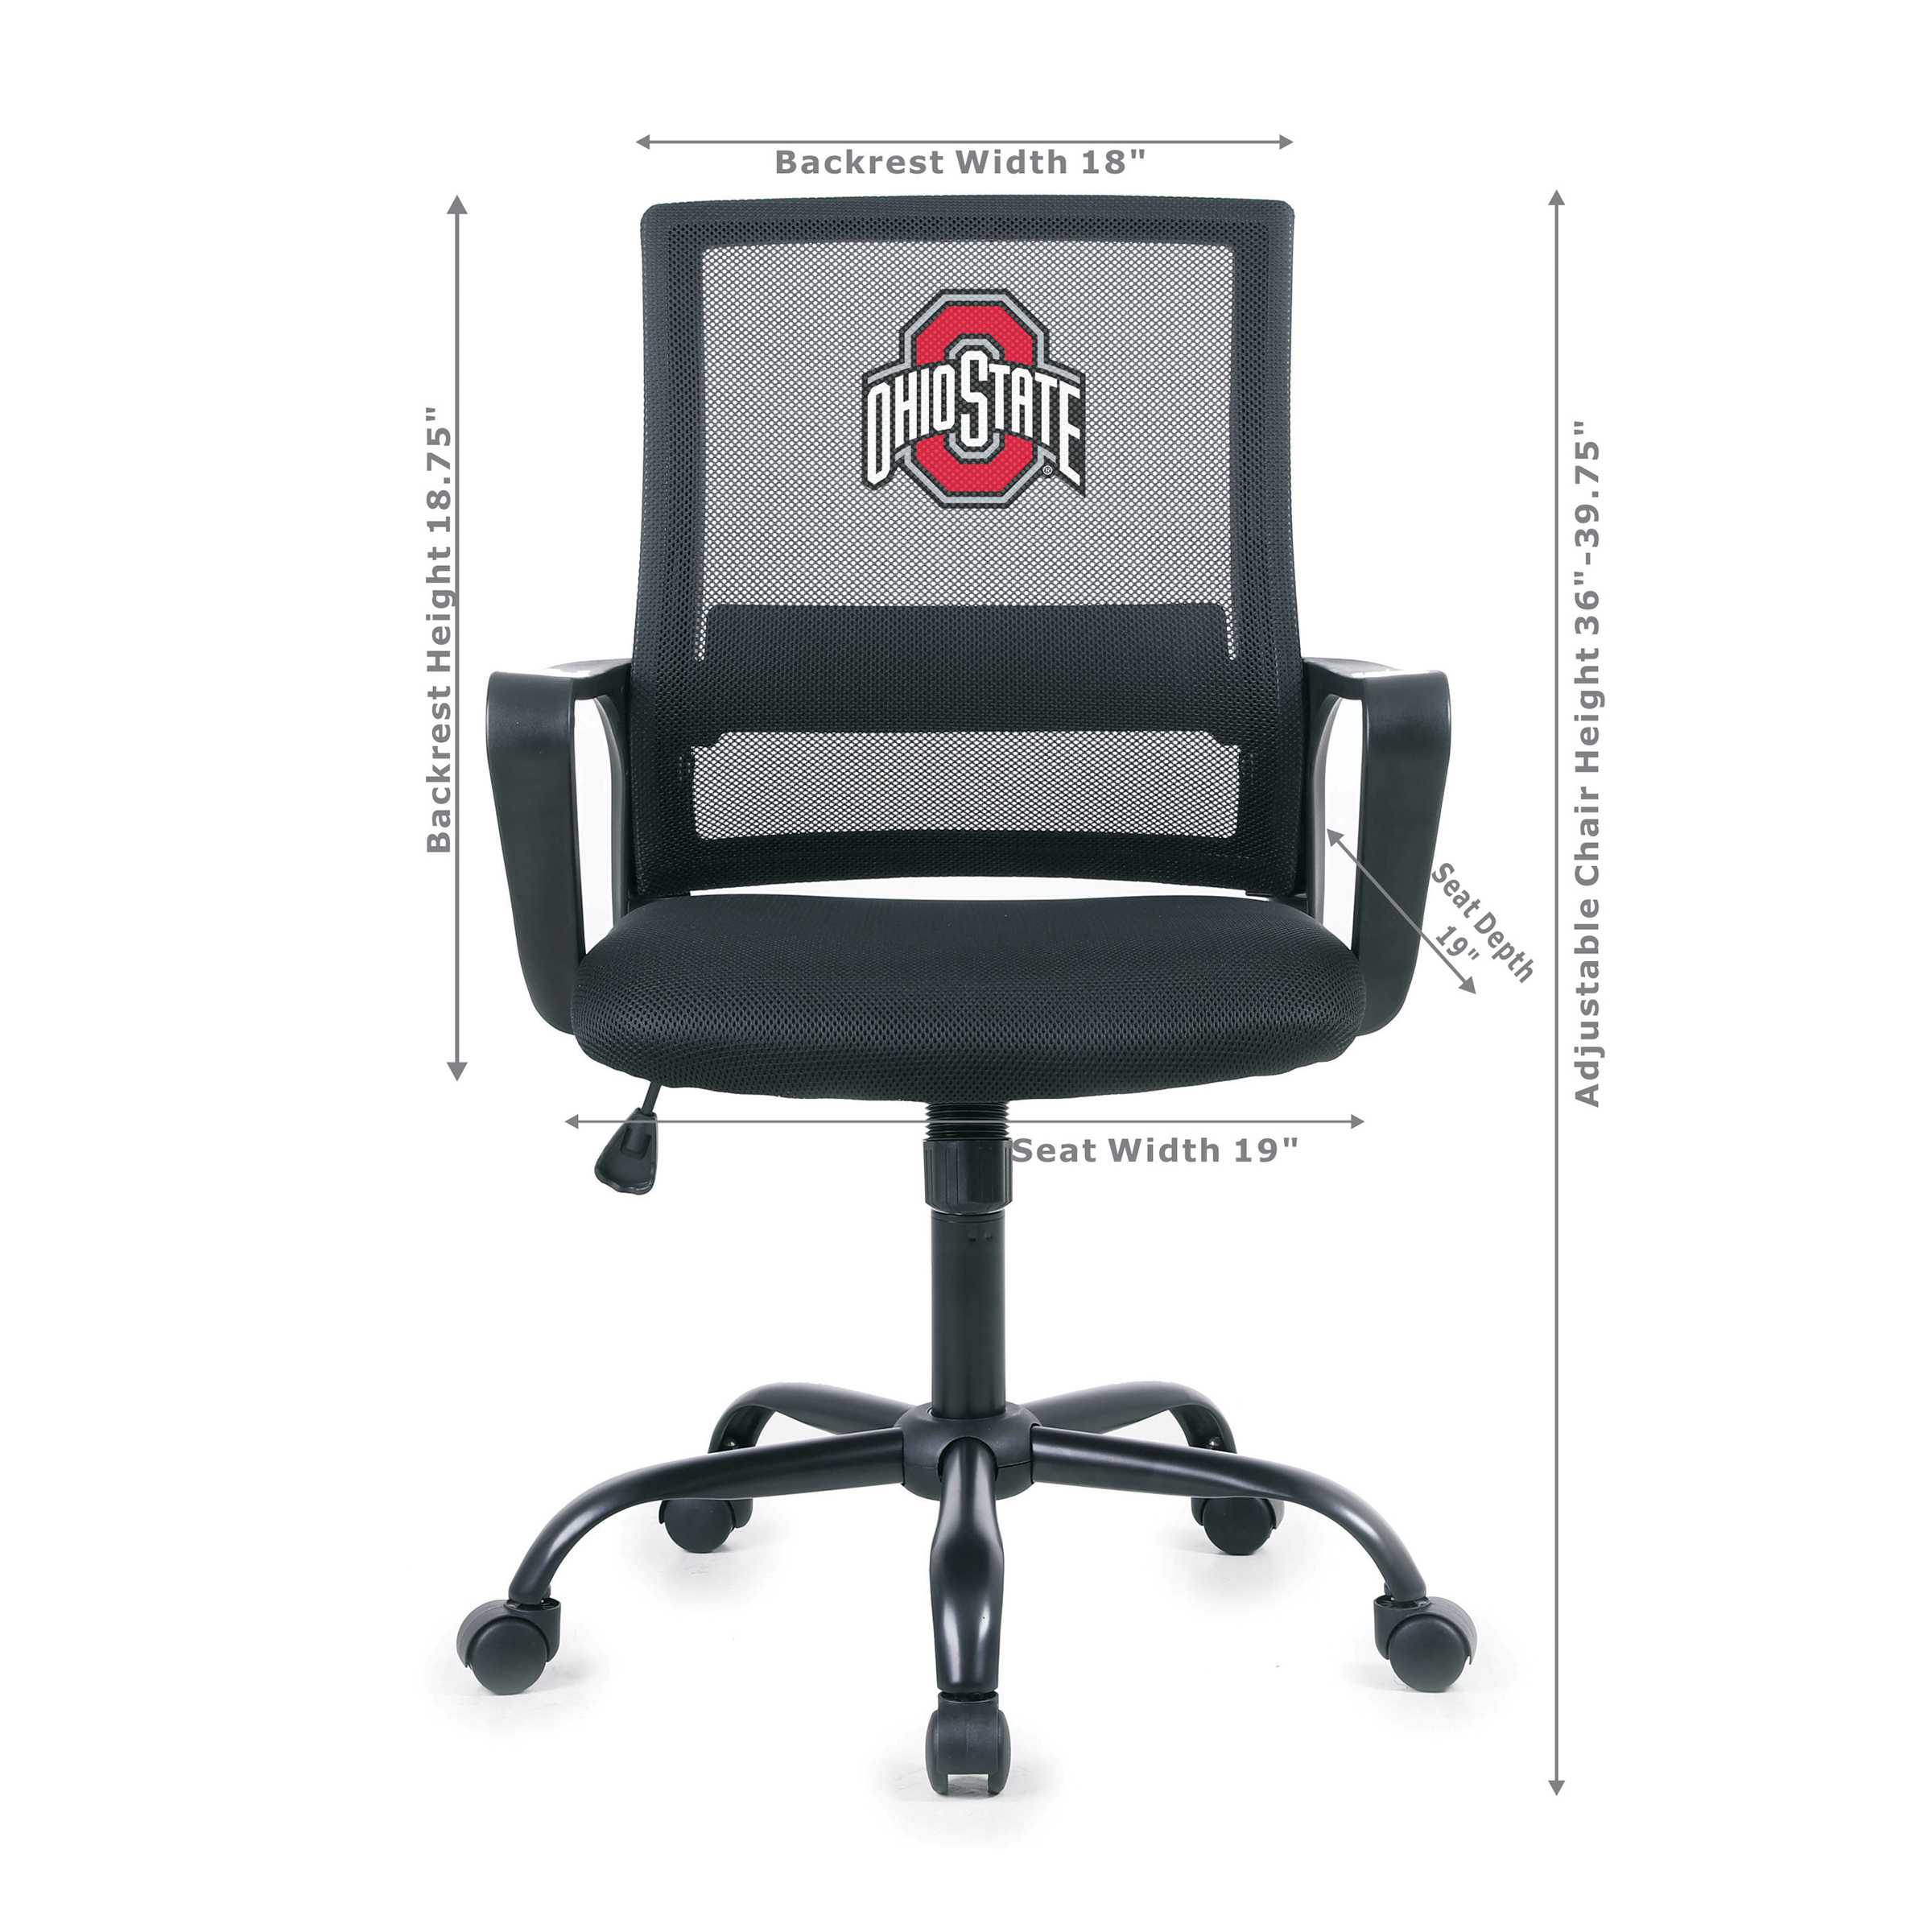 OHIO STATE TASK CHAIR